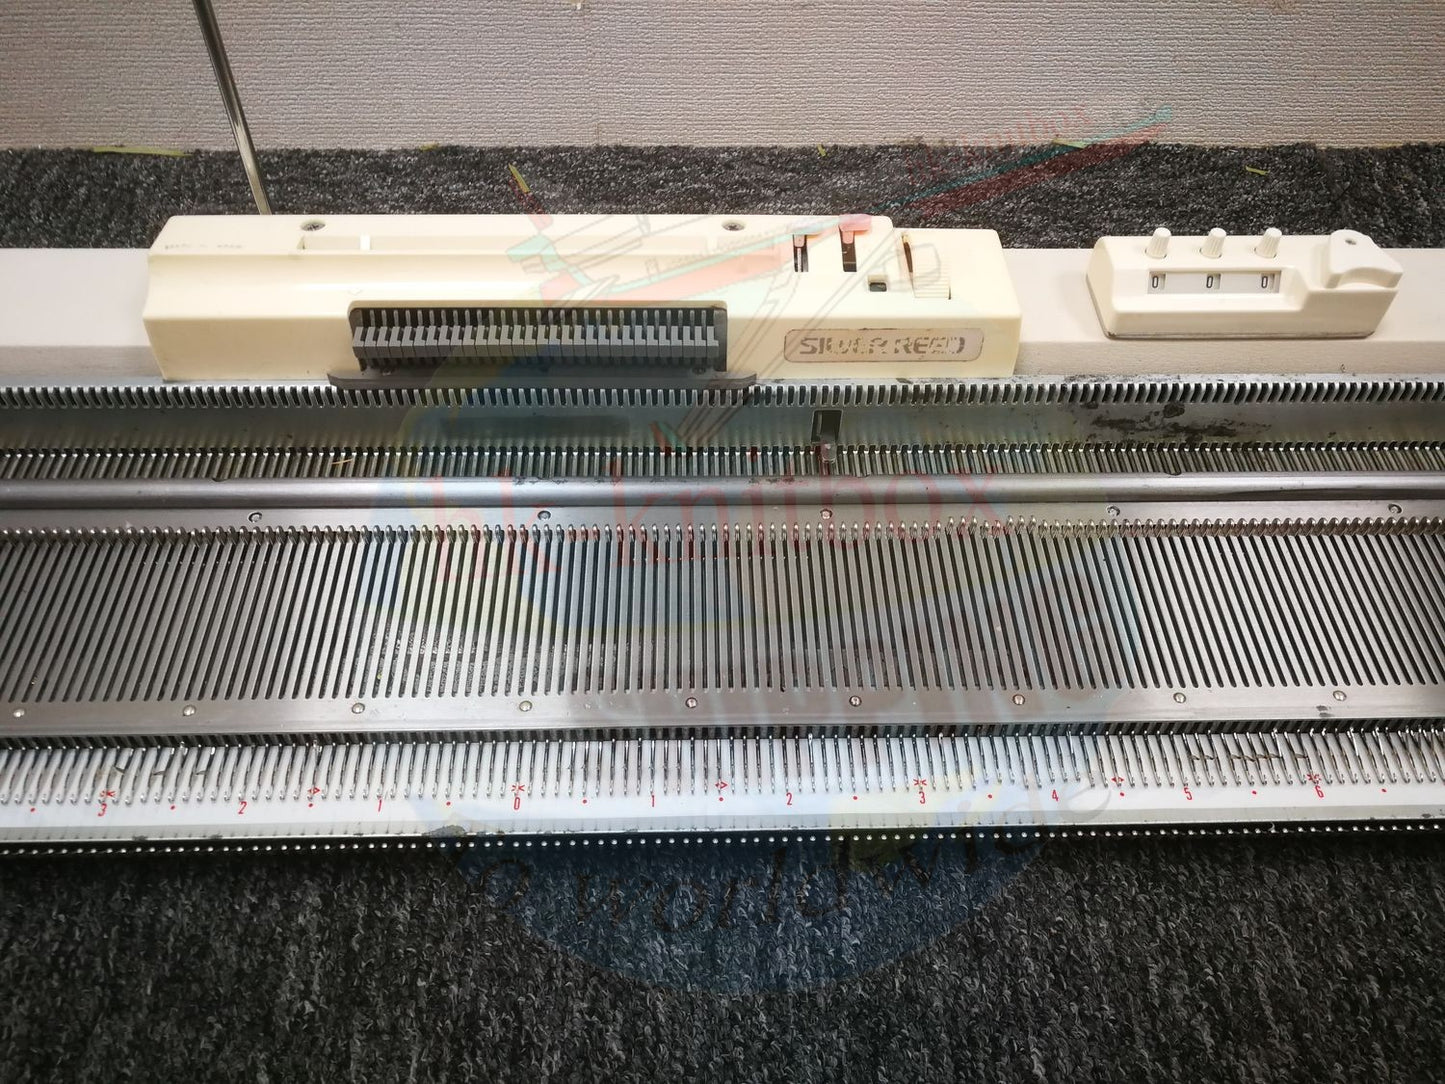 Silver Reed SK272 Fine Gauge Punch card Knitting Machine